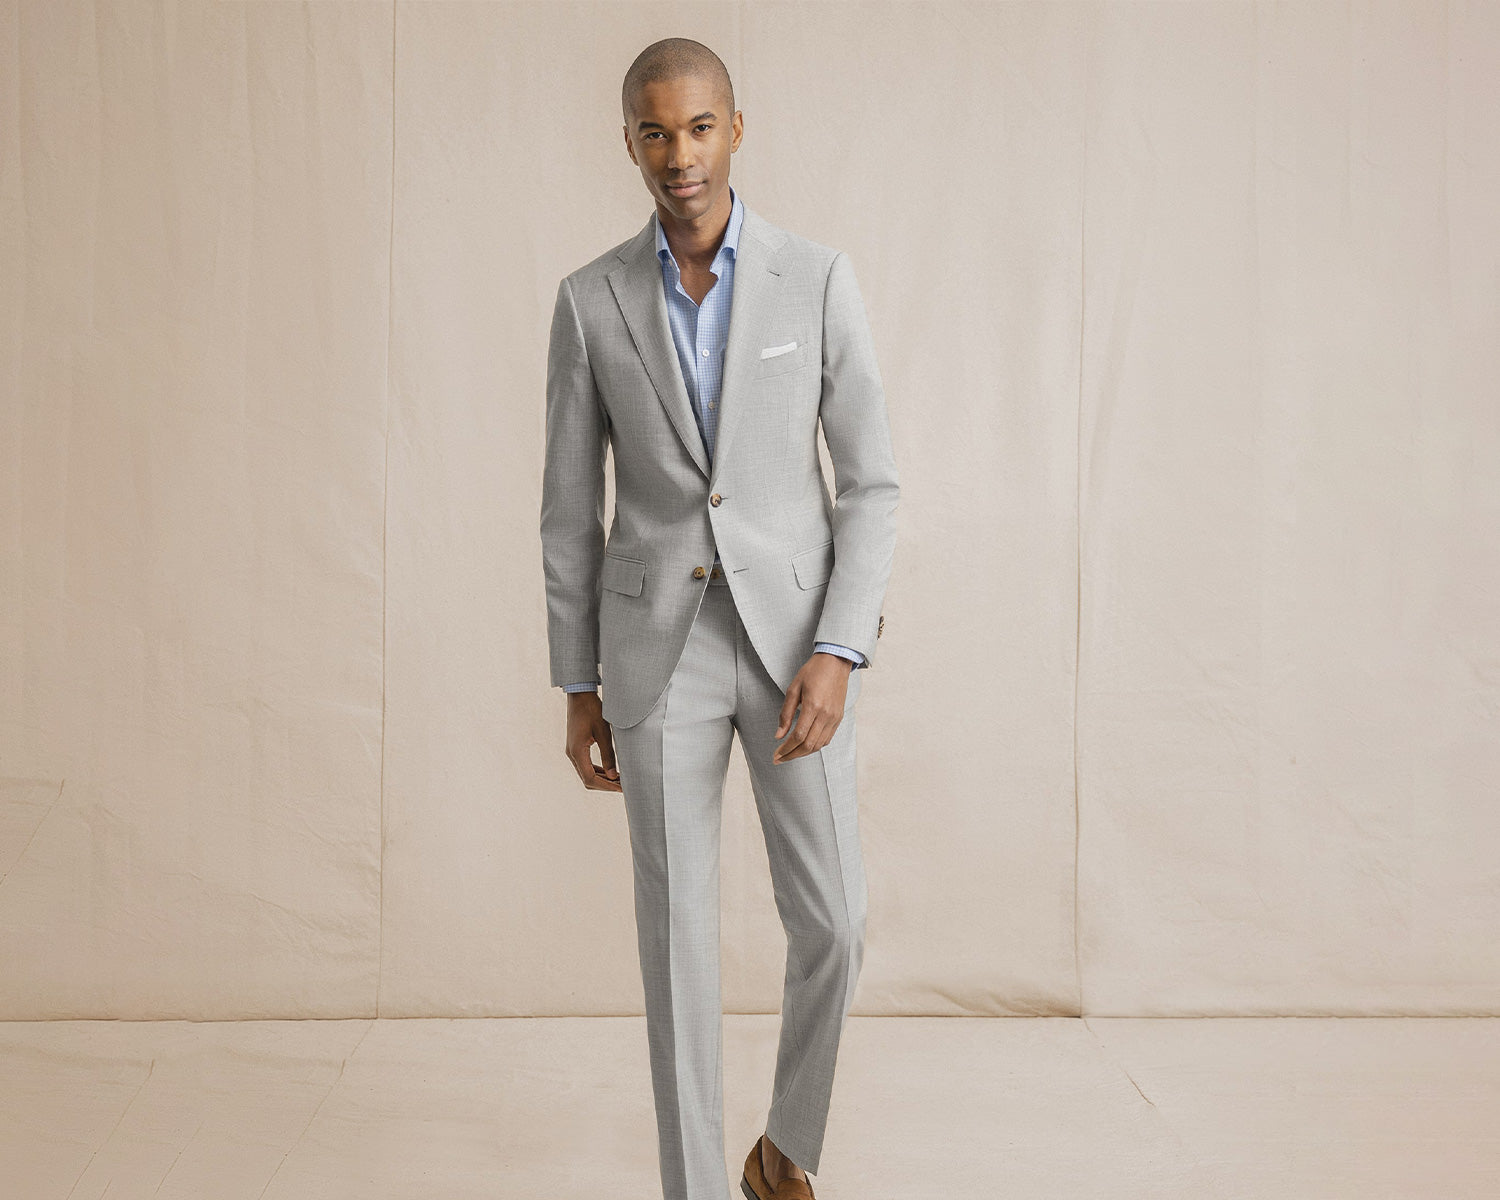 Refining Spring Suits for Men so You're in Full Bloom - Proper Cloth